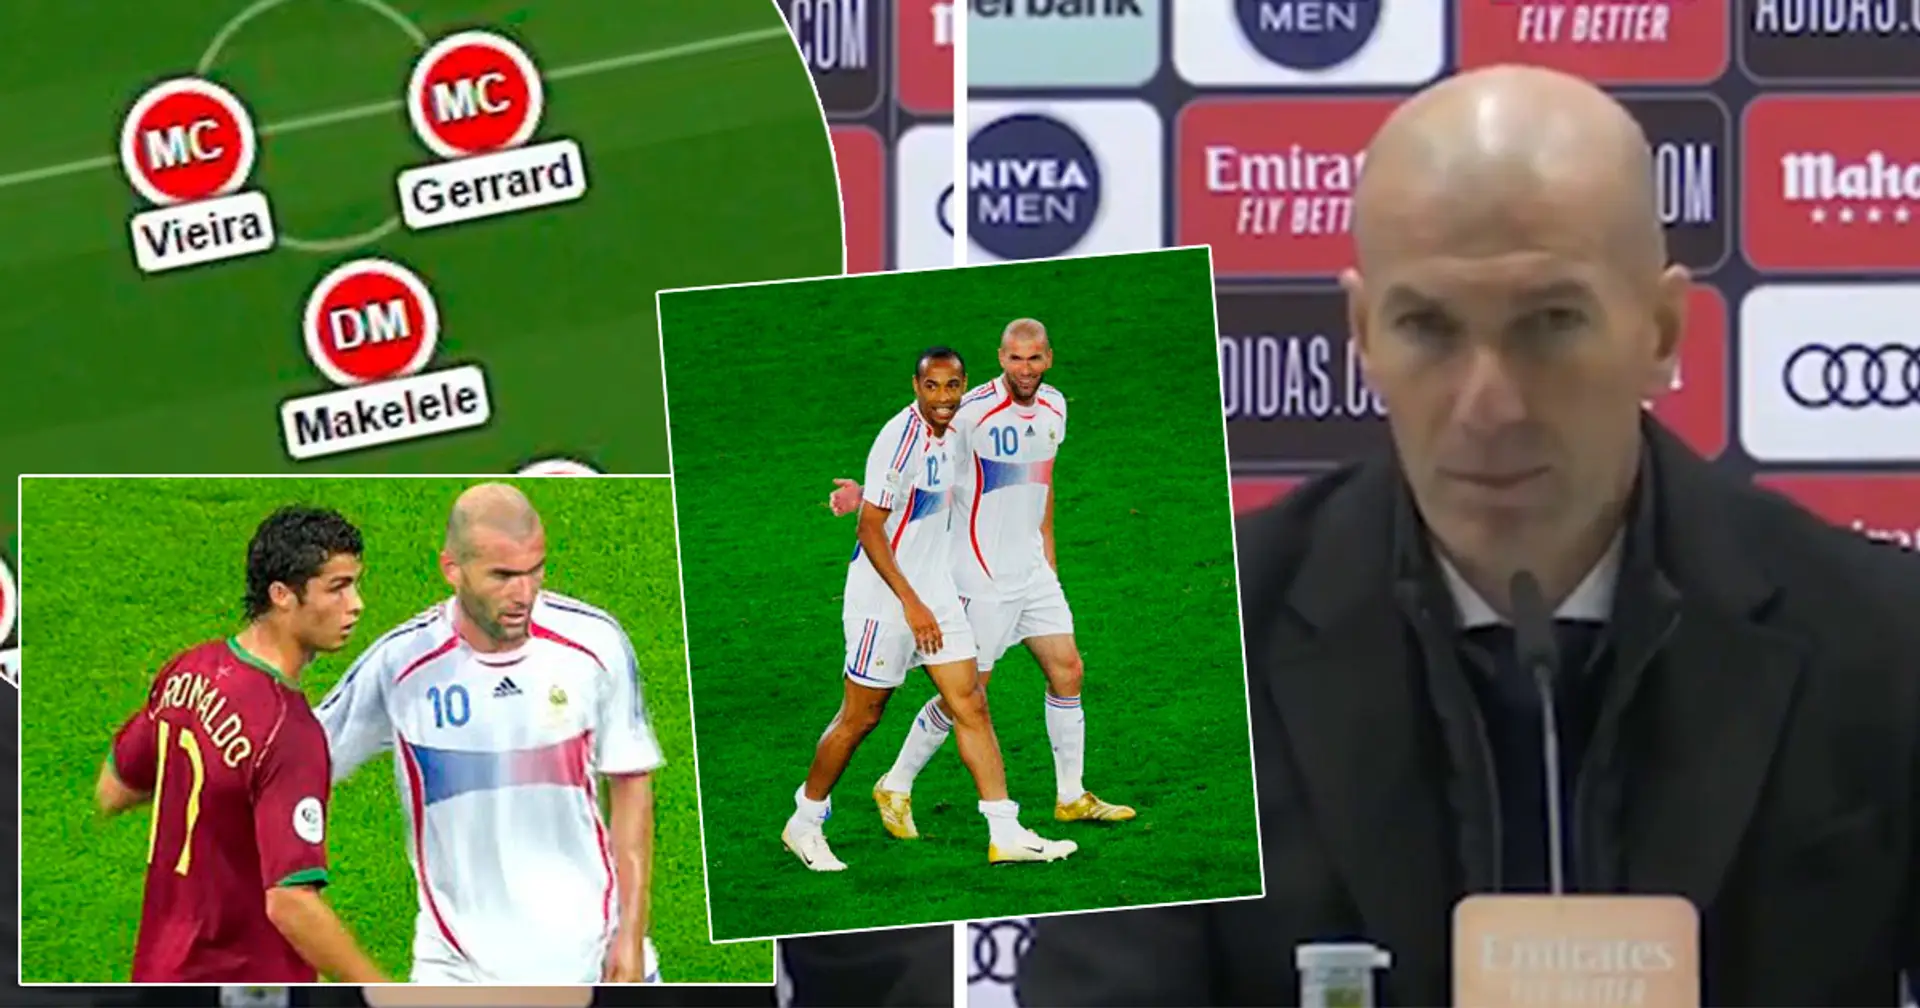 Zidane names his ultimate Premier League XI - 2 former Chelsea stars included